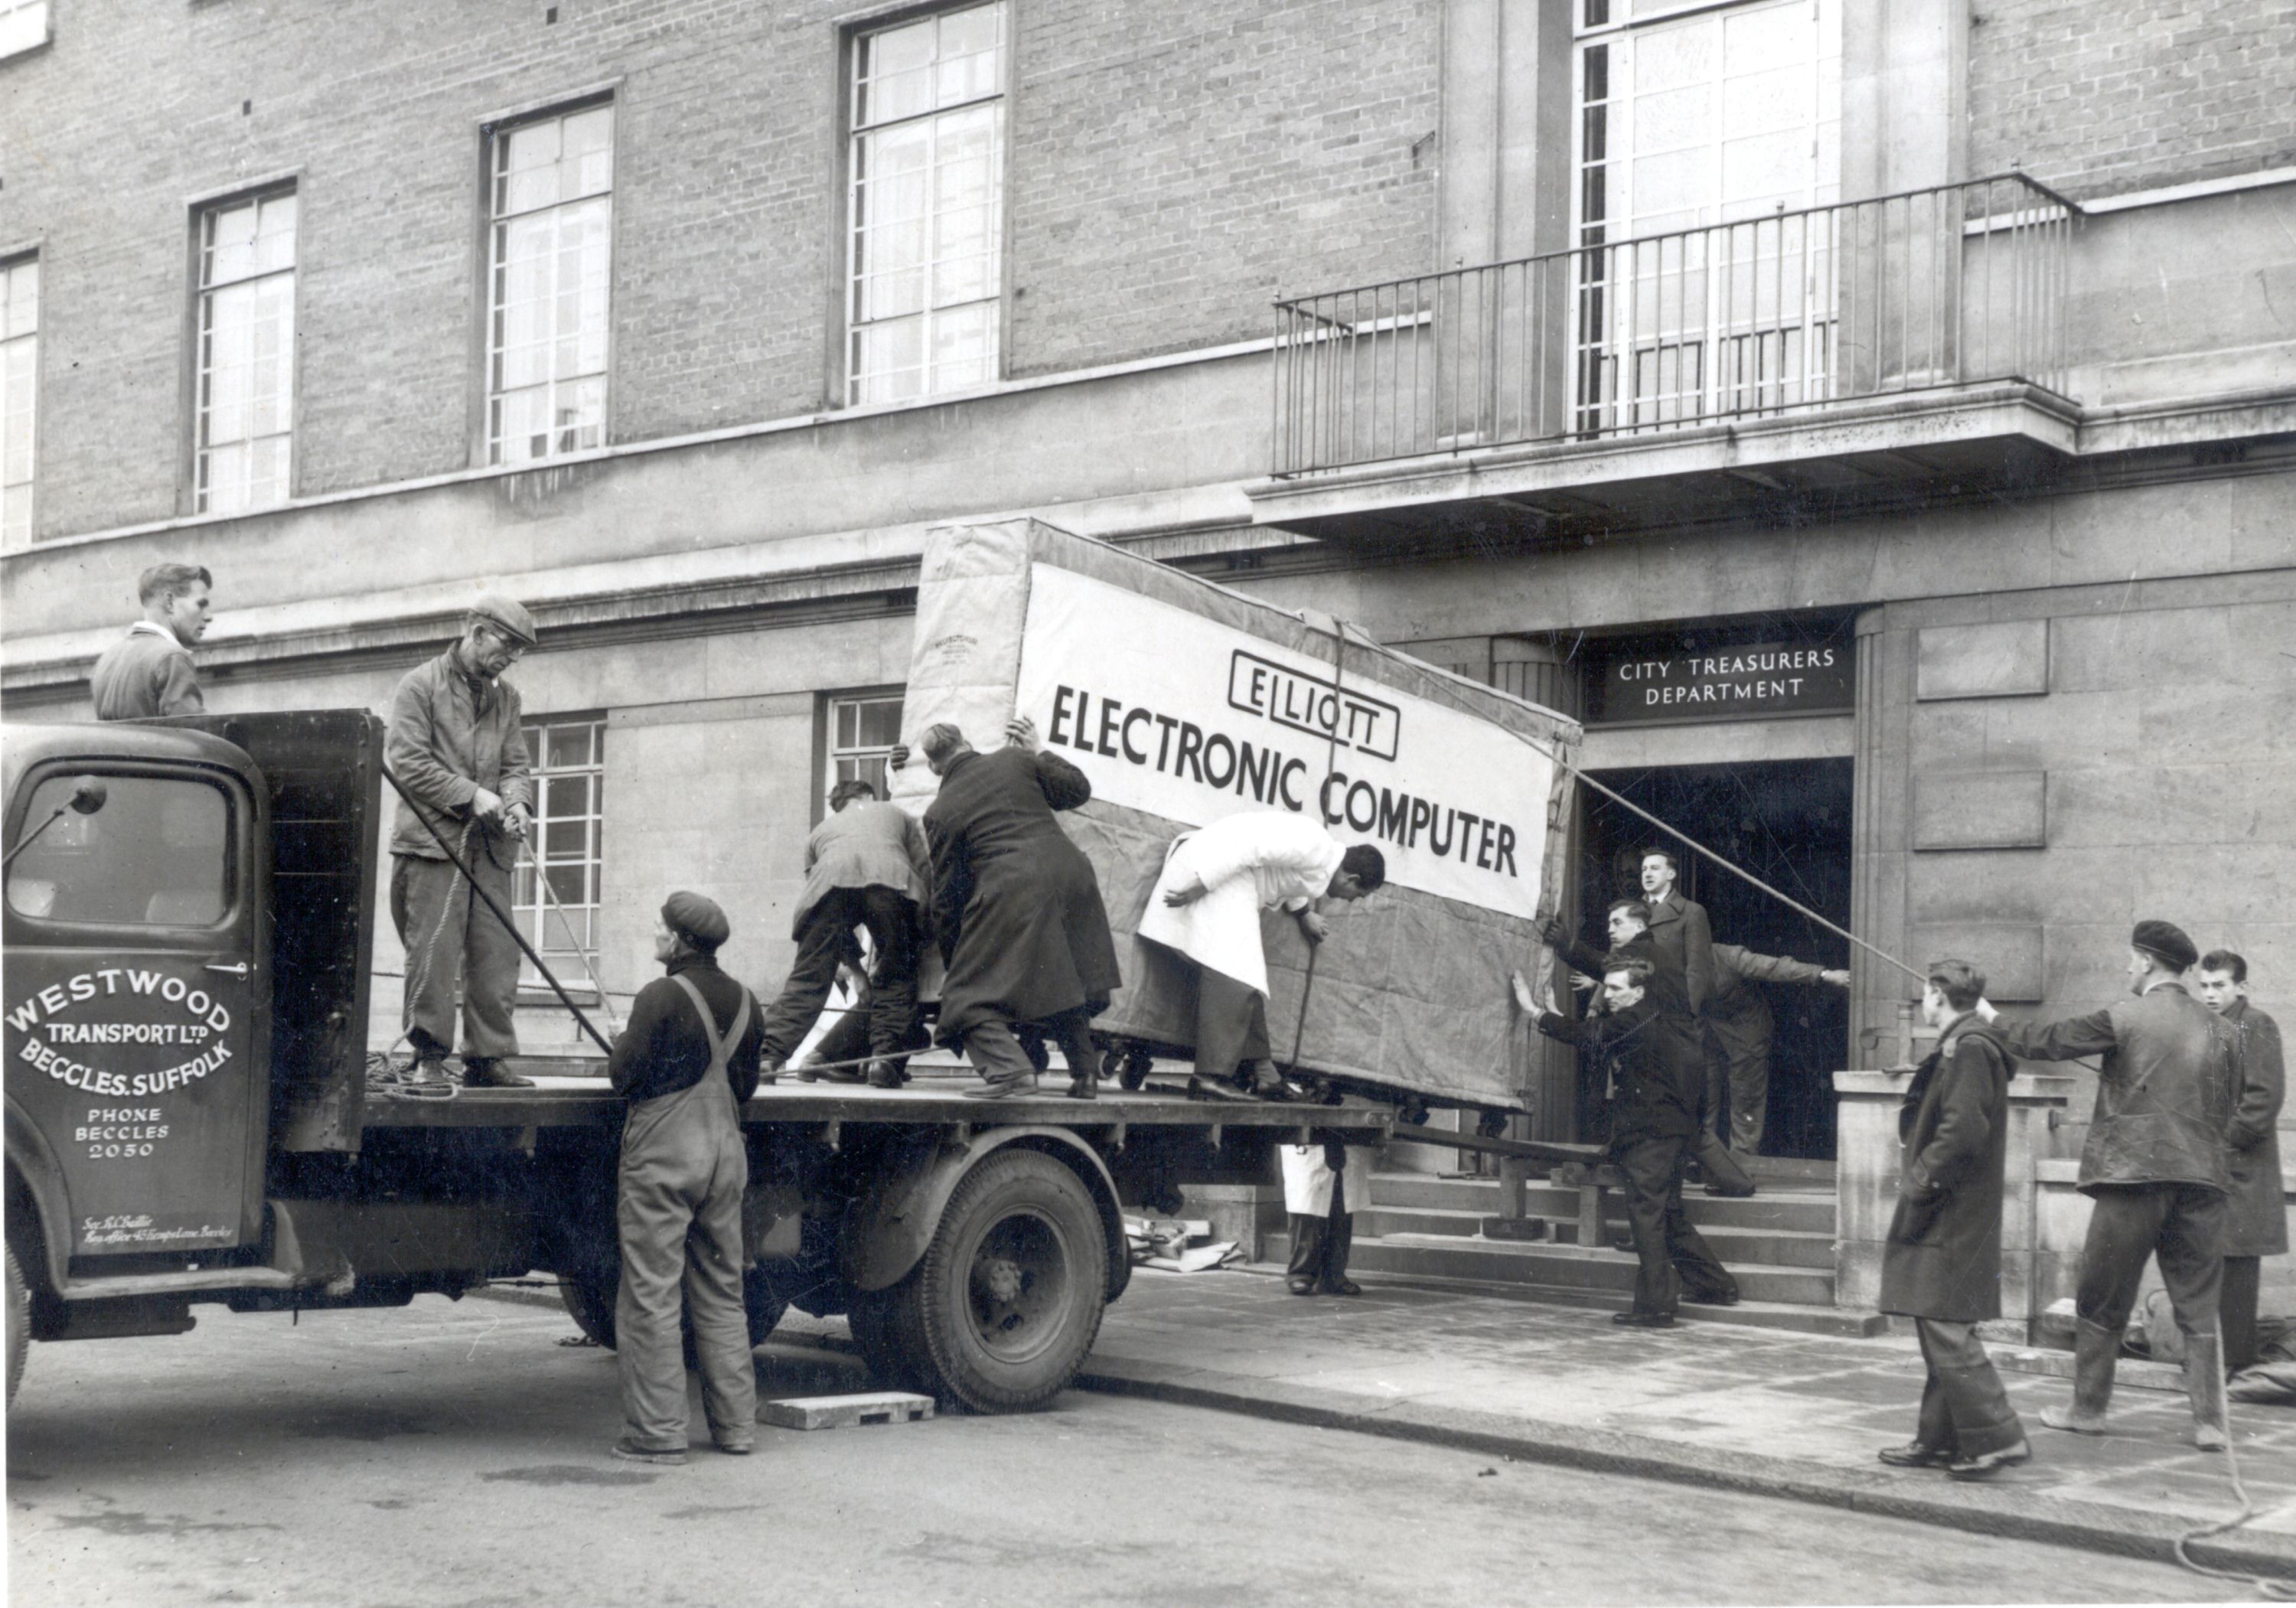 Photograph of Norwich City Council’s first computer being delivered to the City Treasurer’s Department in Bethel Street, Norwich, 1957. Norfolk Record Office: ACC 2005/170 (facsimile)